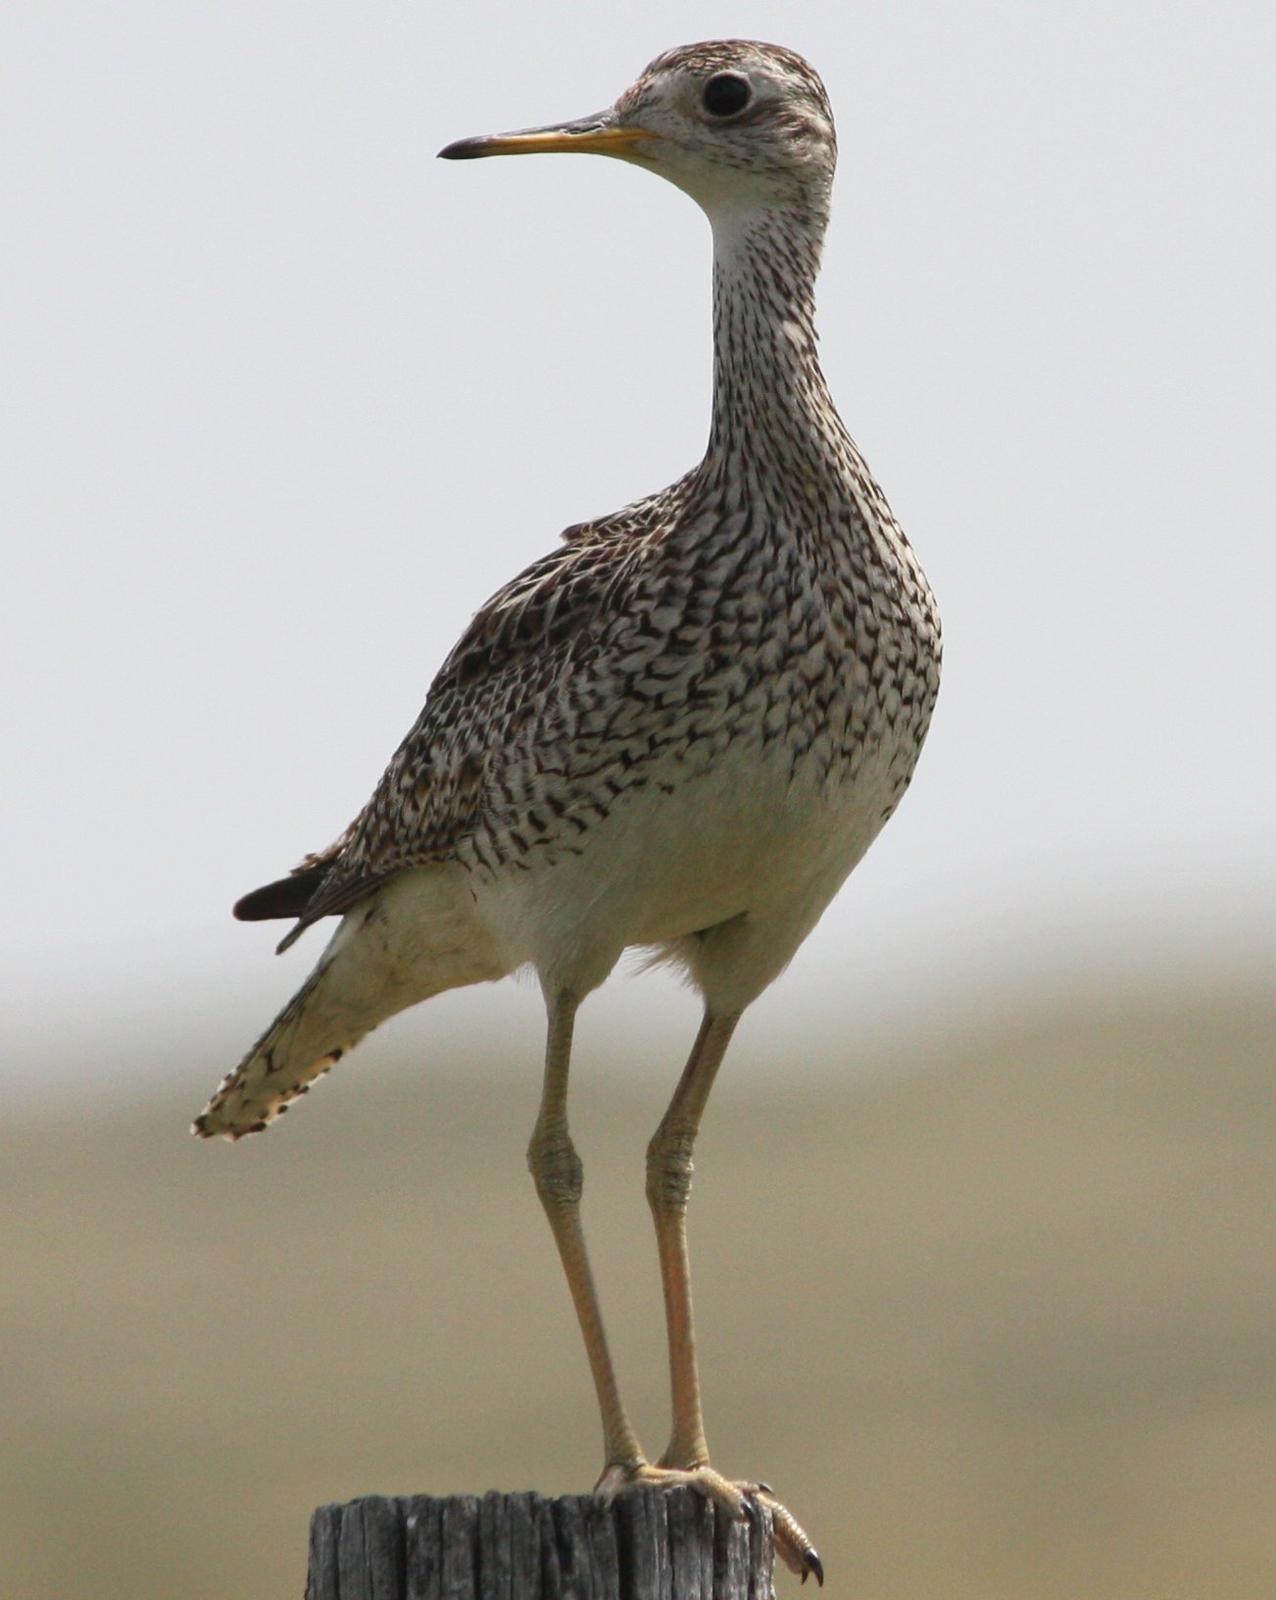 Upland Sandpiper Photo by Andrew Core